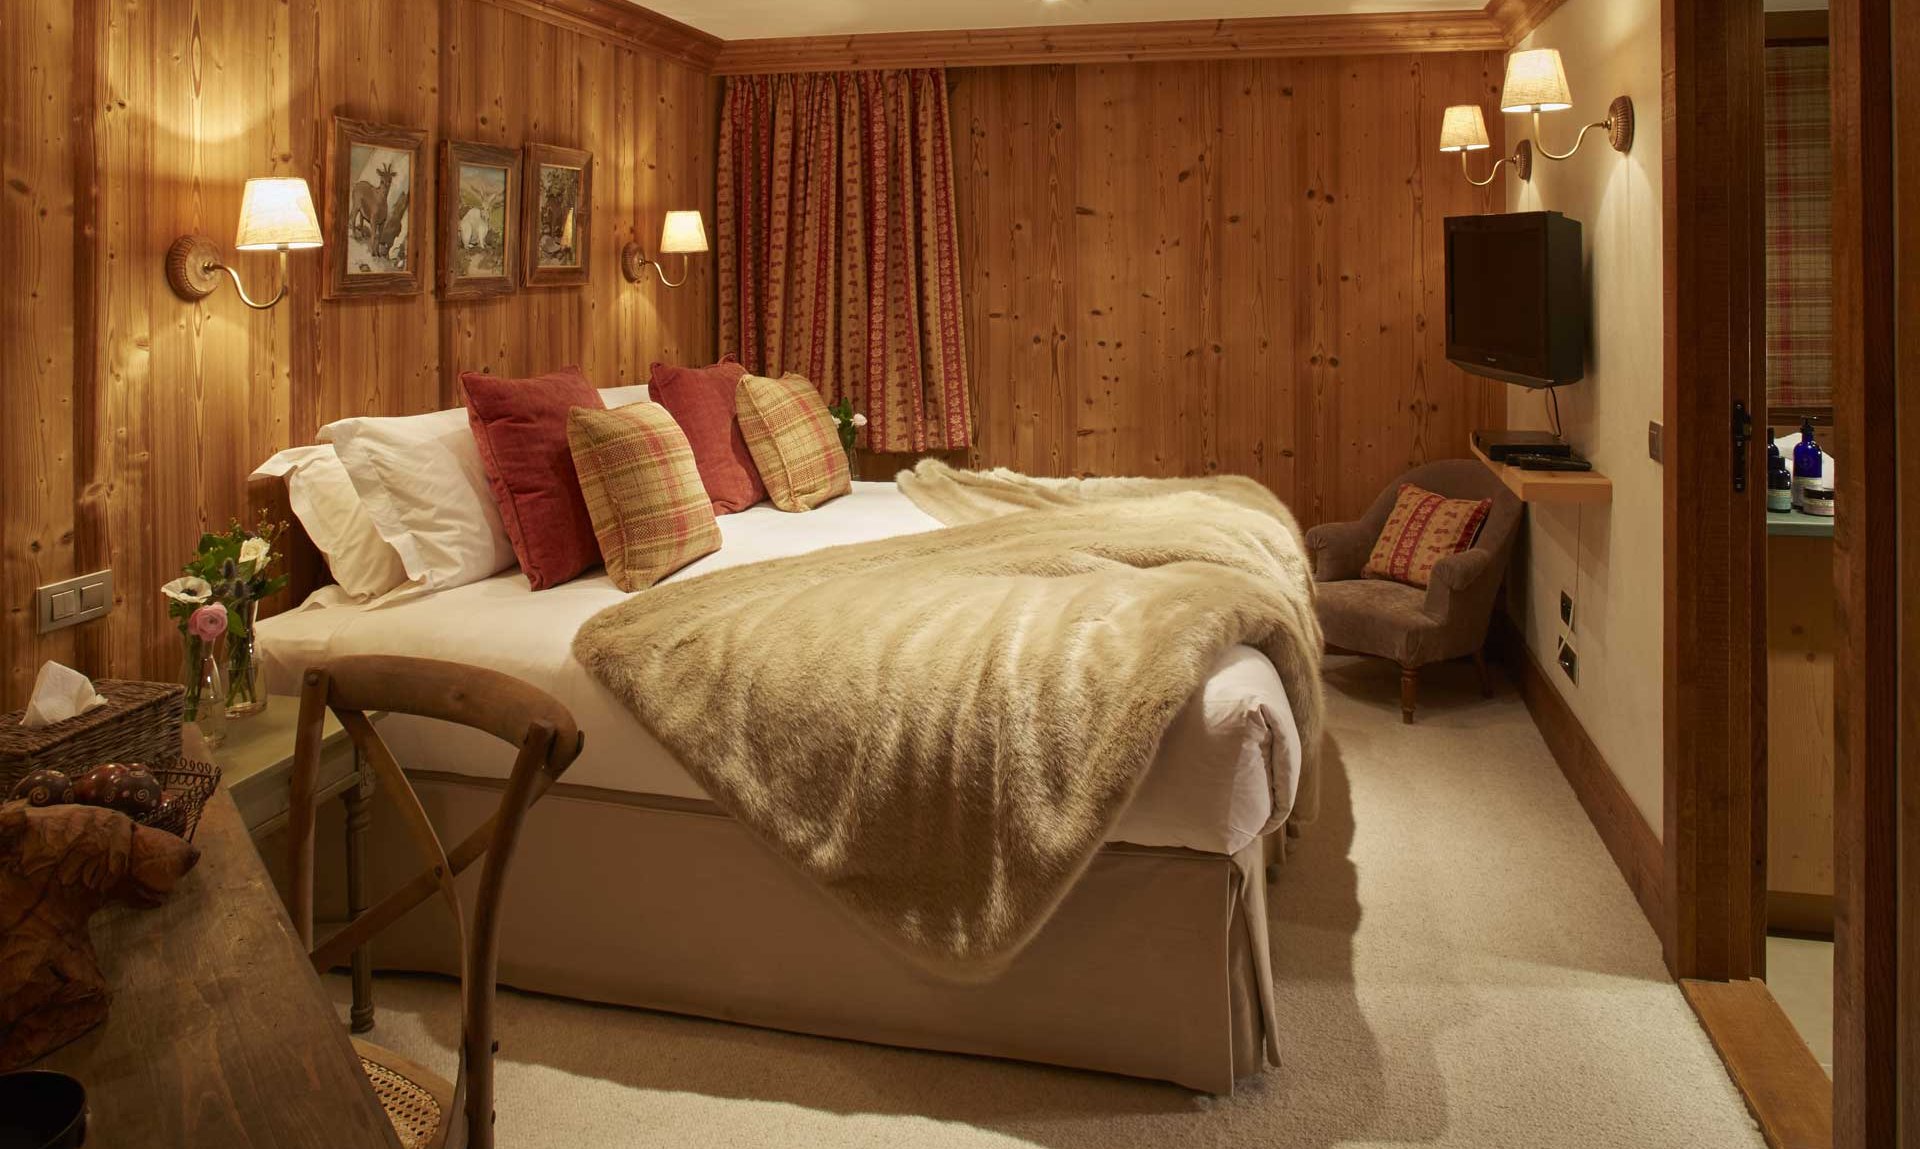 One of the individual bedrooms in Chalet Lapin Blanc Meribel